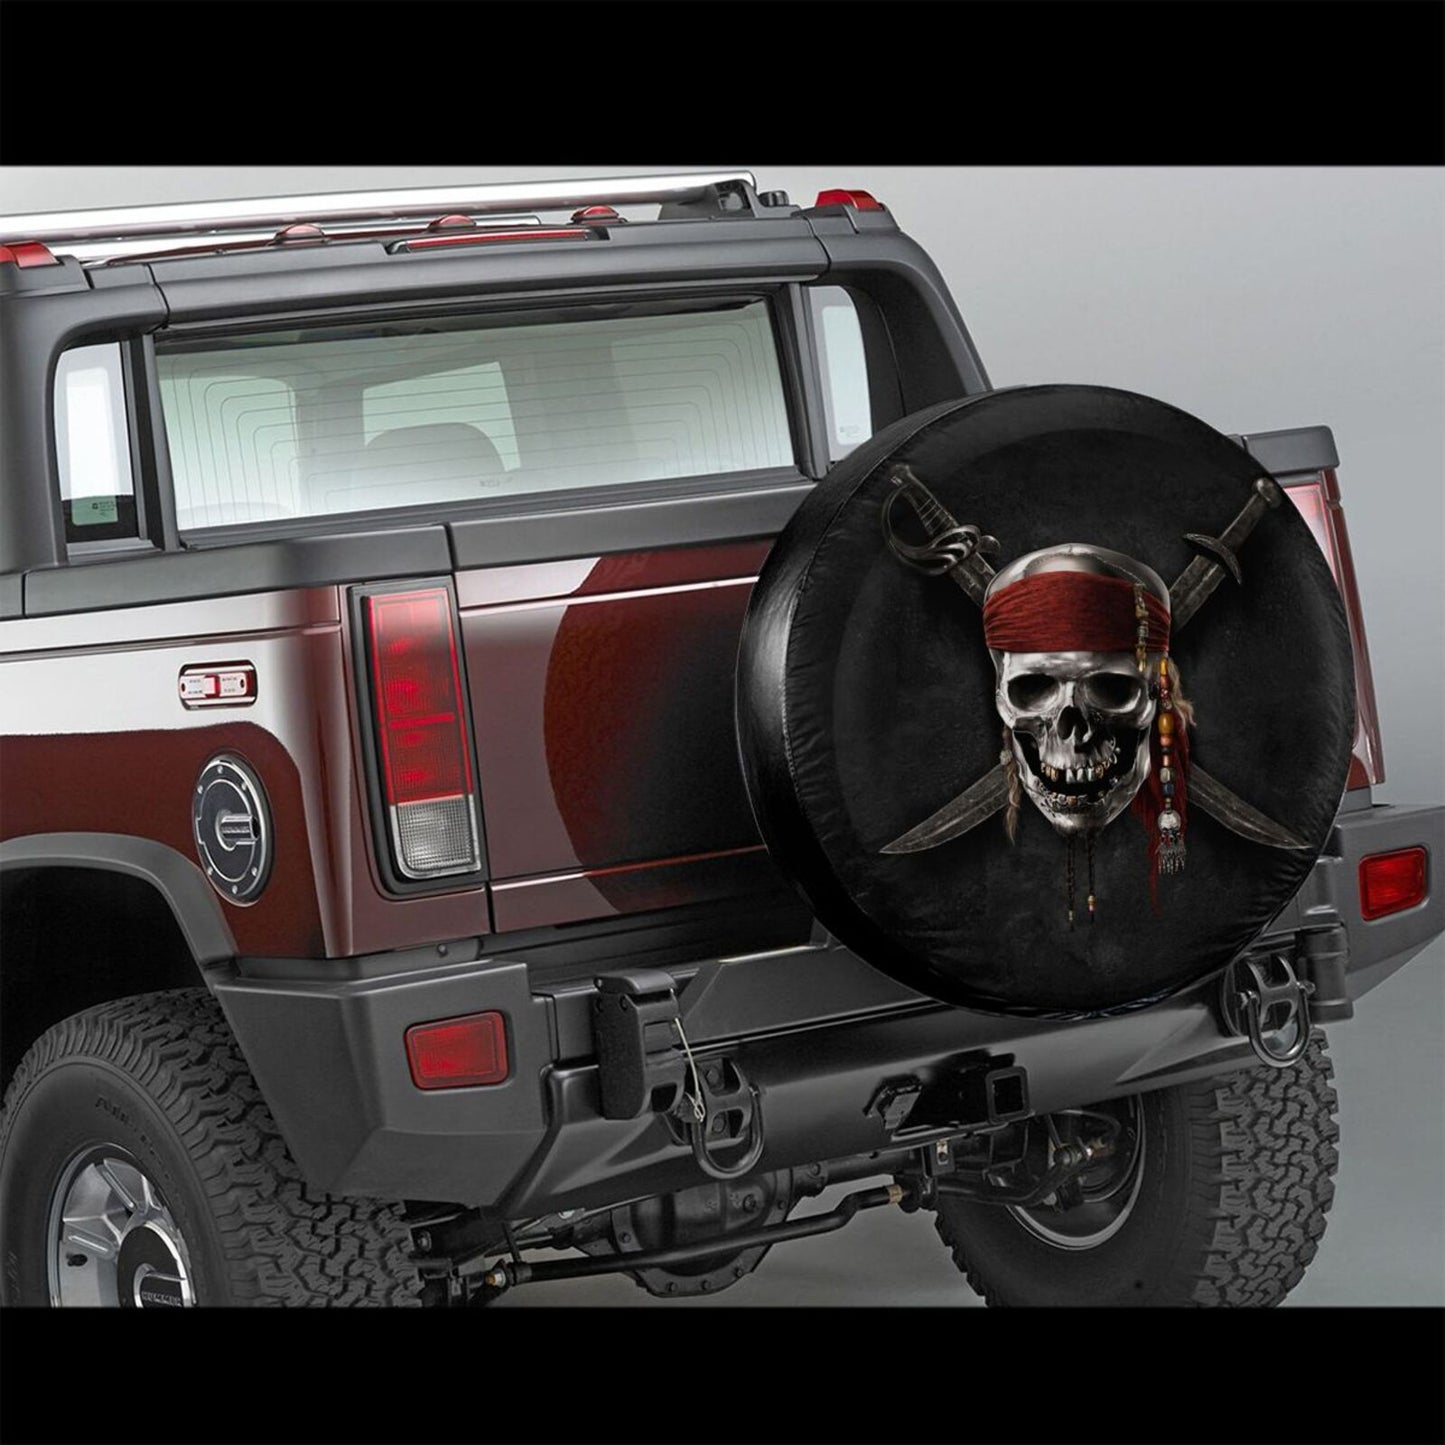 Skull American Flag Spare Tire Cover Spare Tire Cover For Camping, Bronco, CRV, Jeep Wrangle car Accessories tire protector